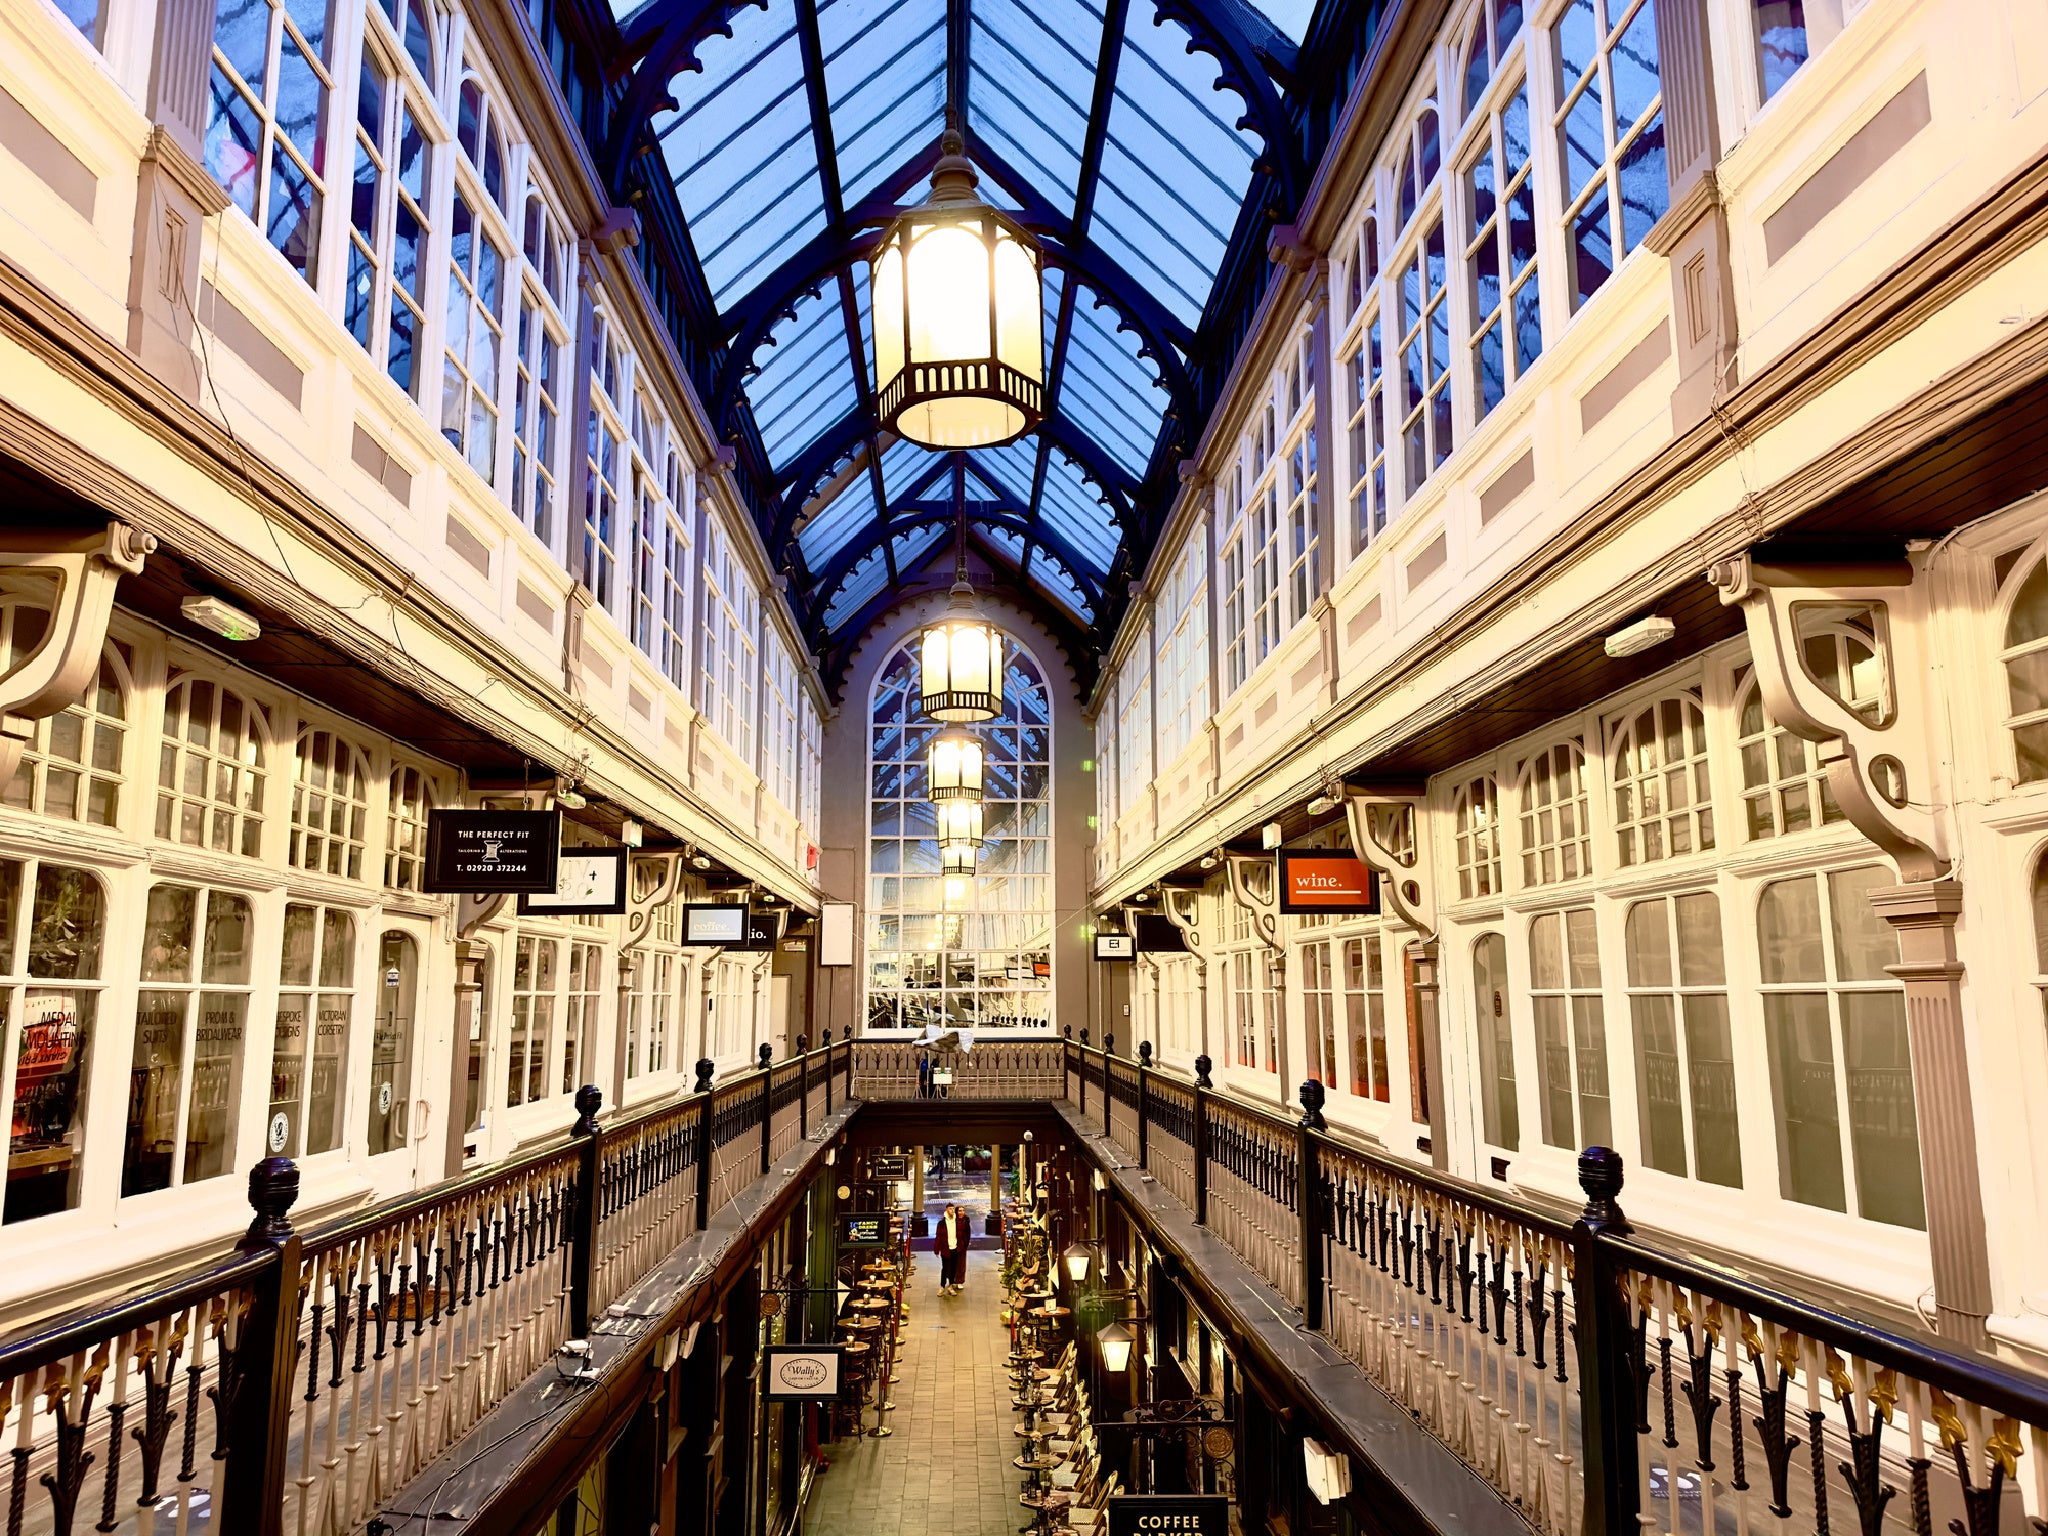 Some of Cardiff’s finest shops are found within the warren of arcades